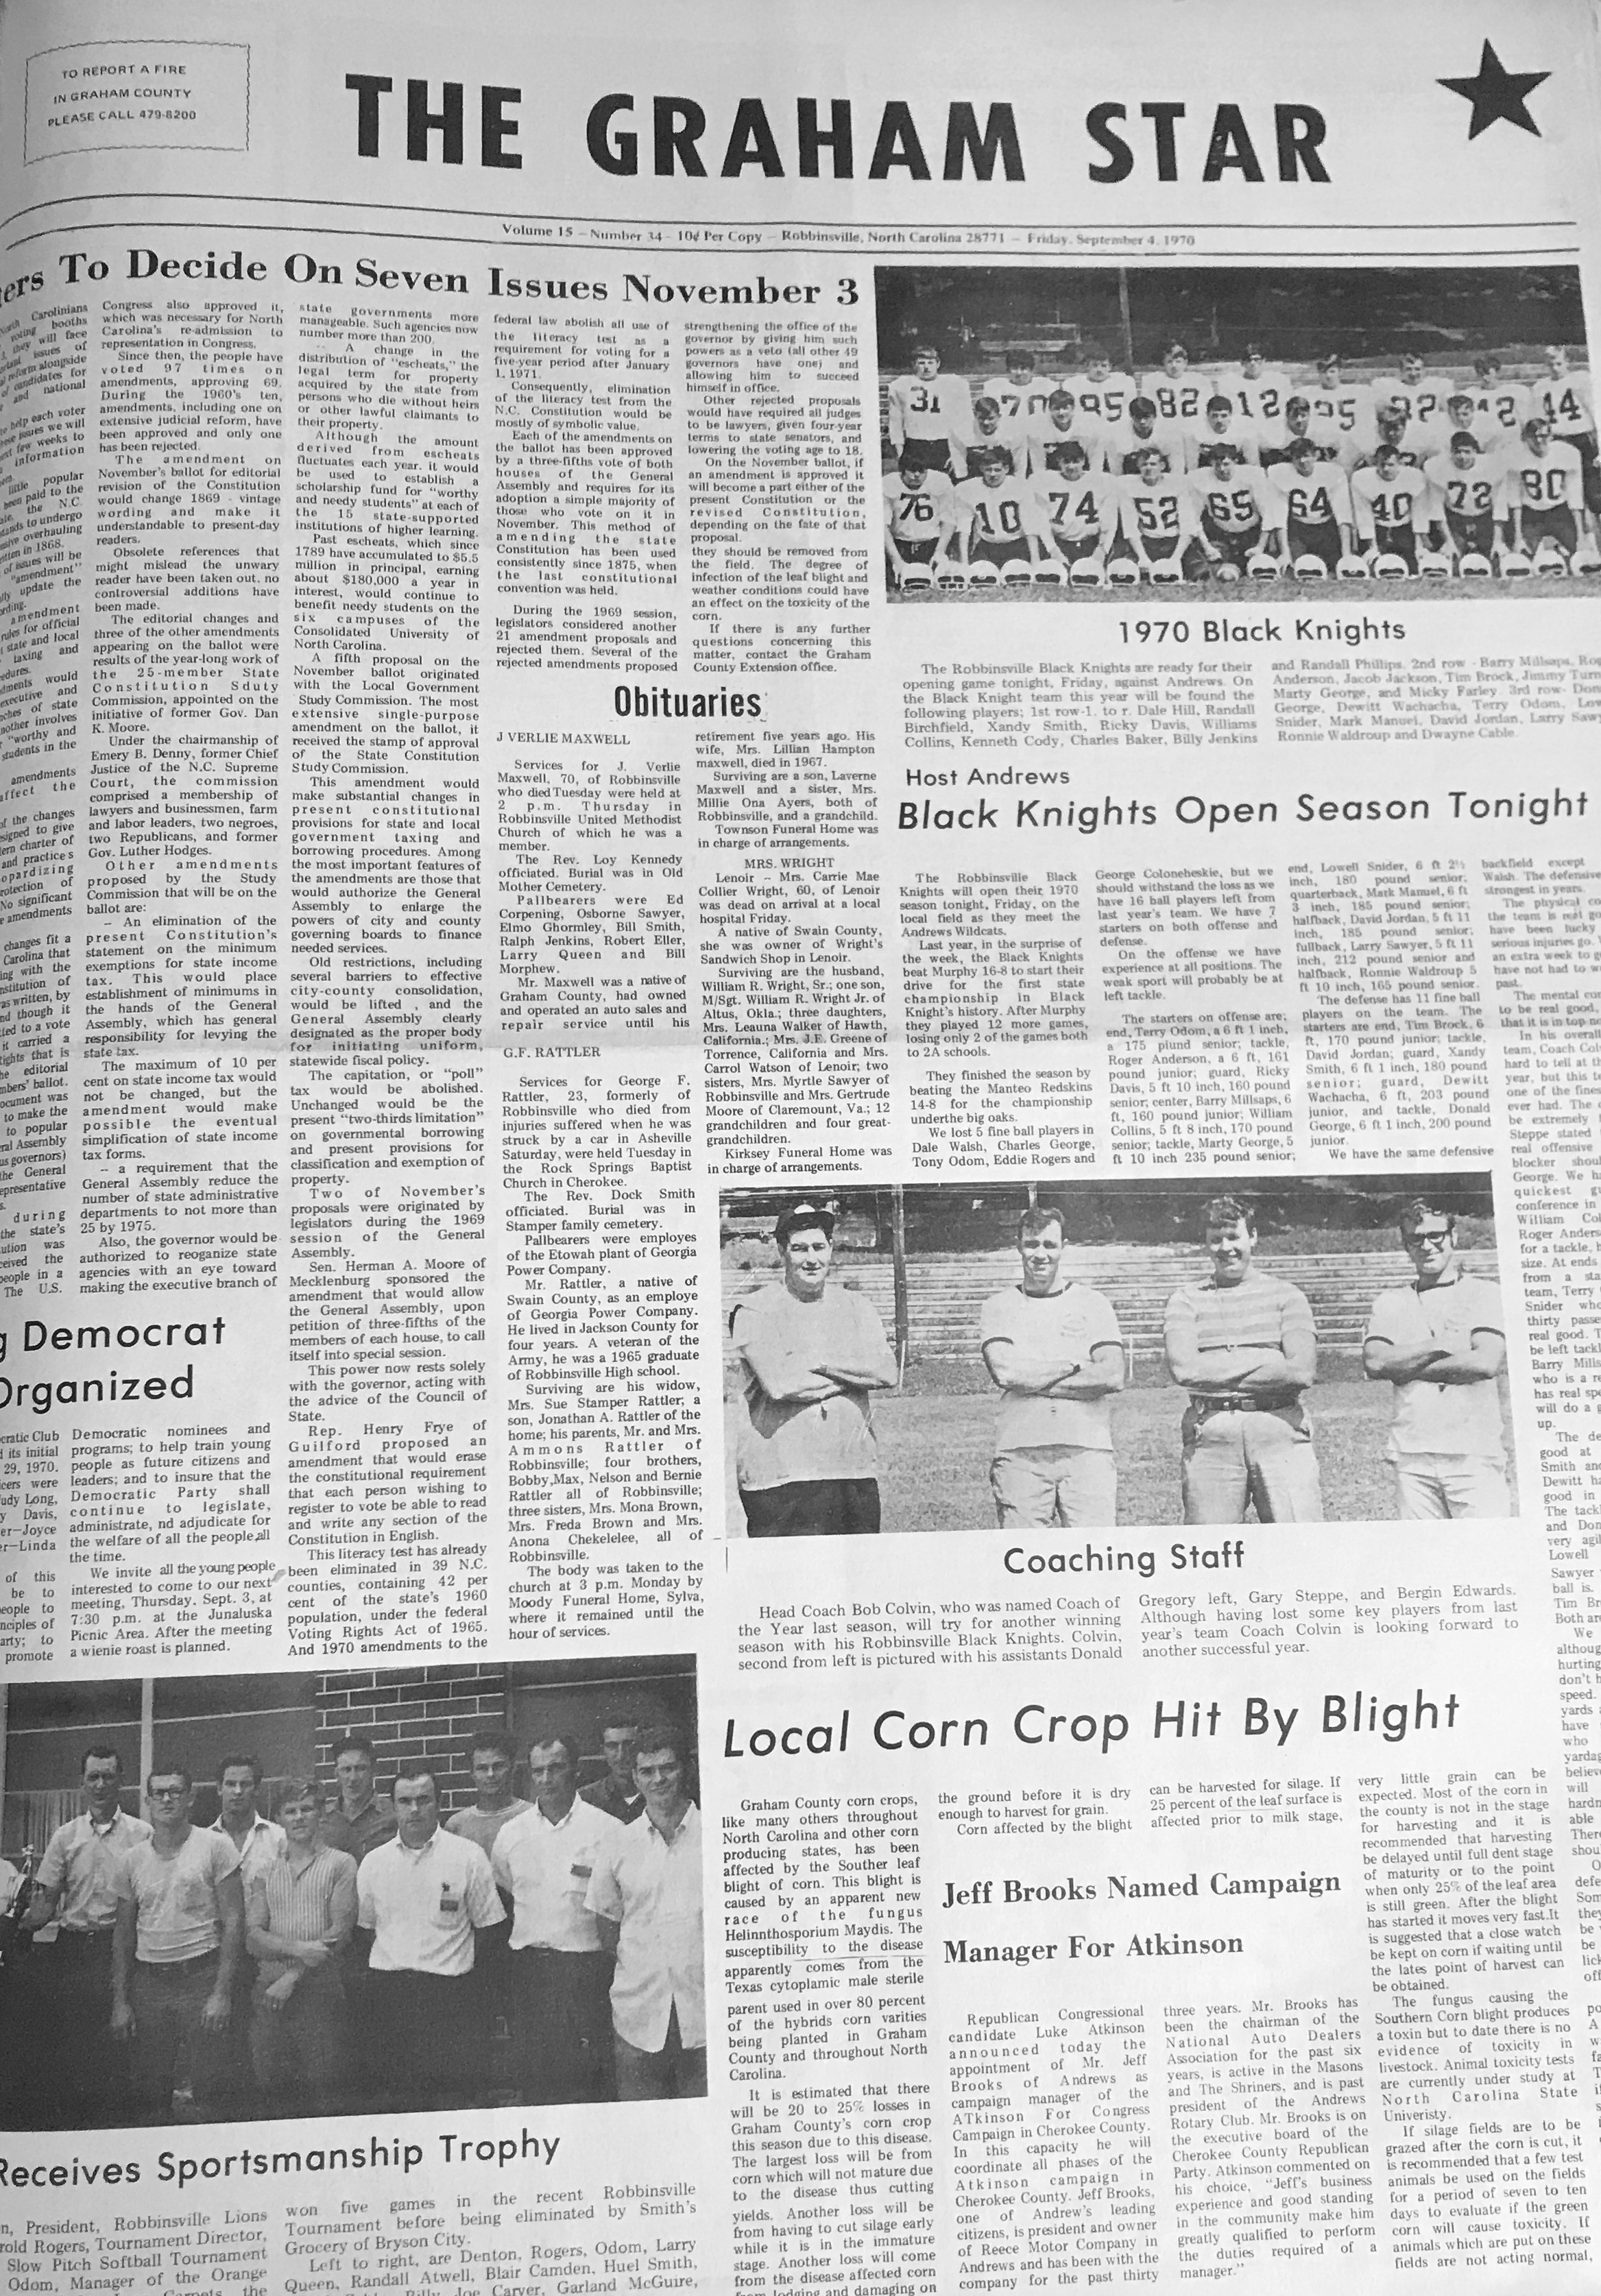 The Graham Star’s front page from 50 years ago (Sept. 4, 2020).